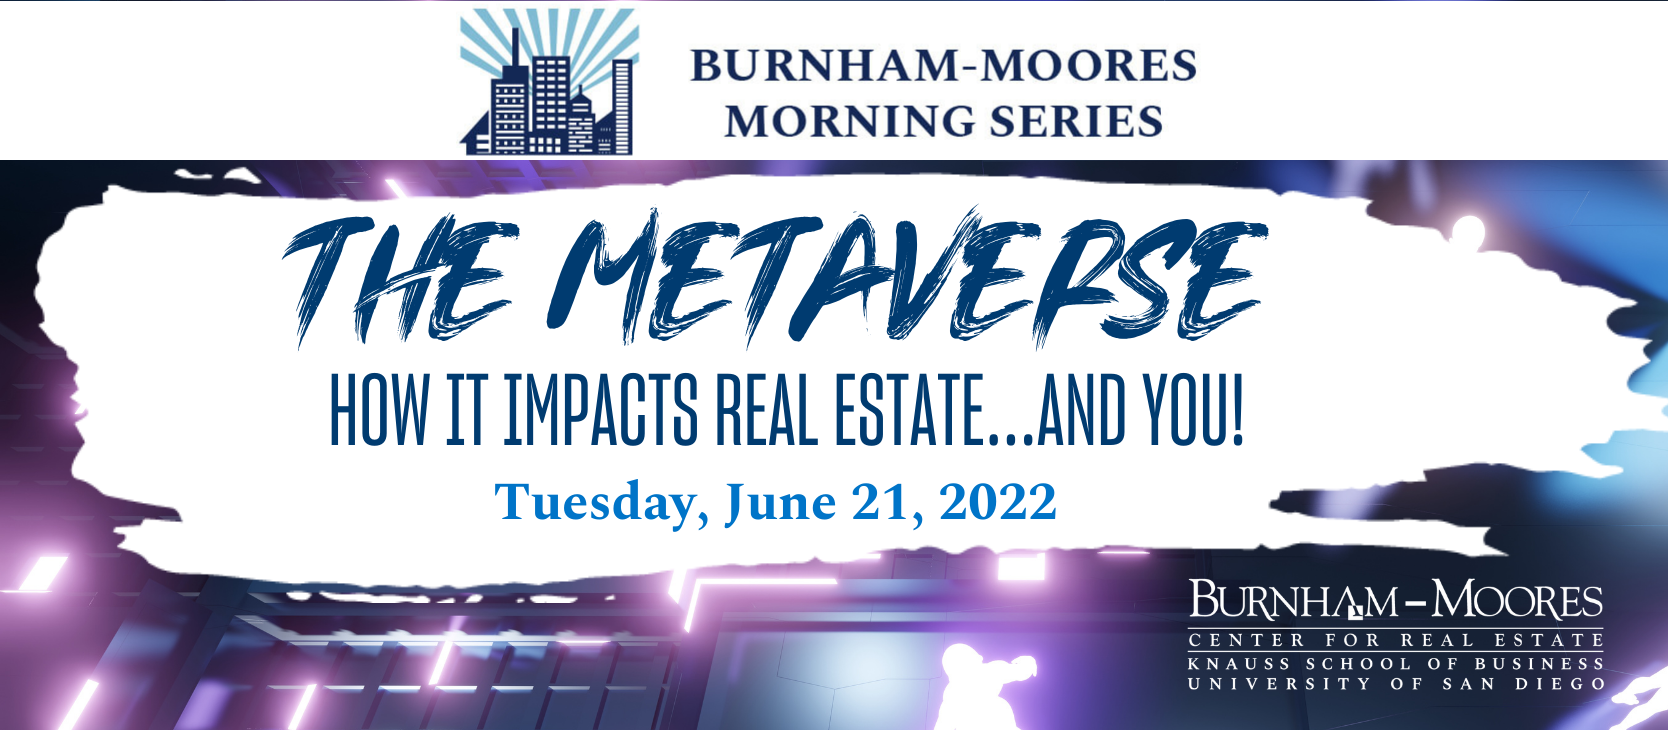 The Metaverse- How It Impacts Real Estate...and You!